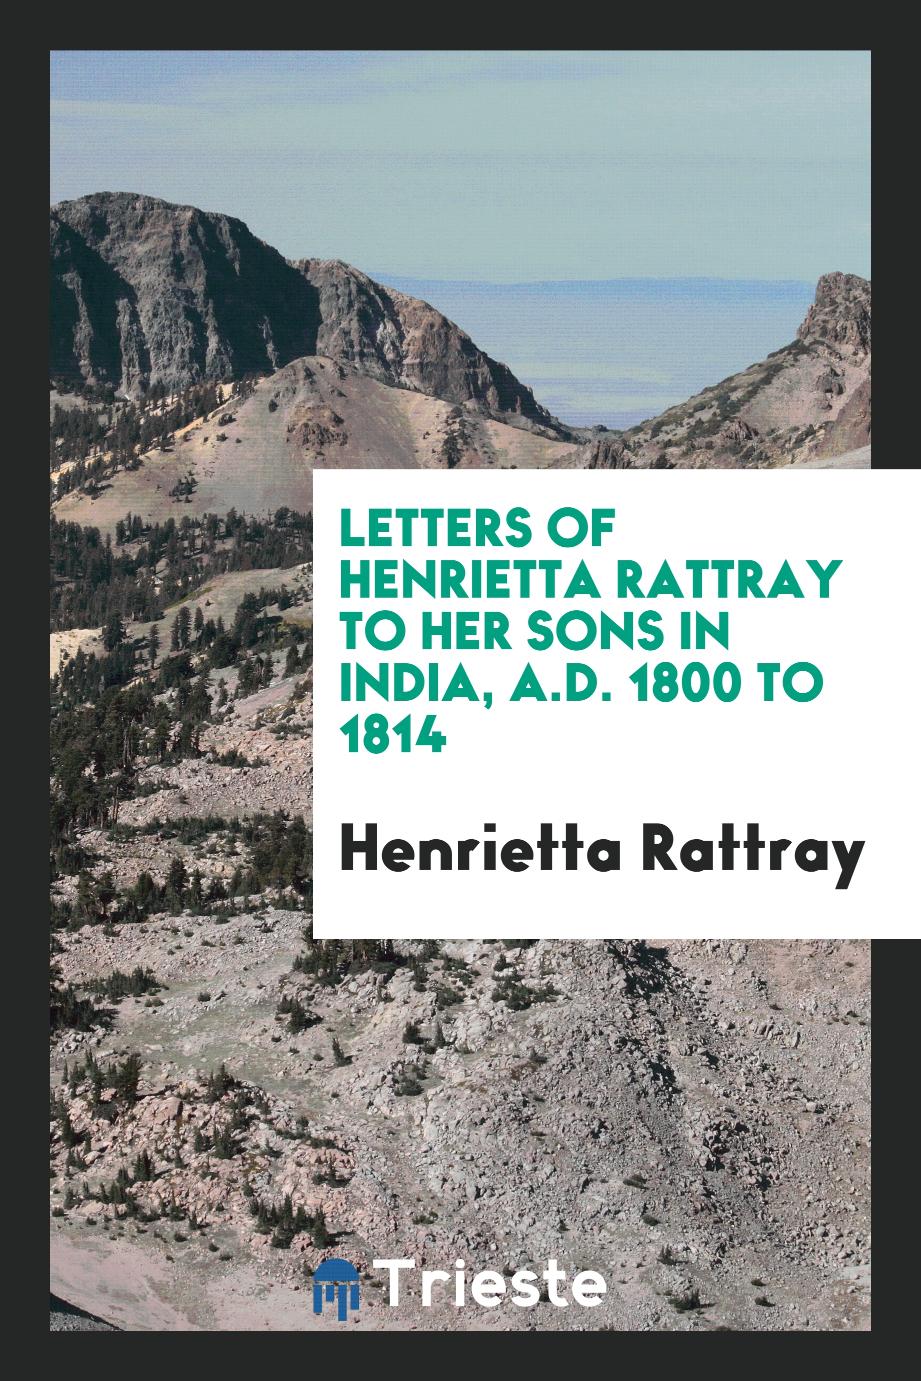 Letters of Henrietta Rattray to Her Sons in India, A.D. 1800 to 1814